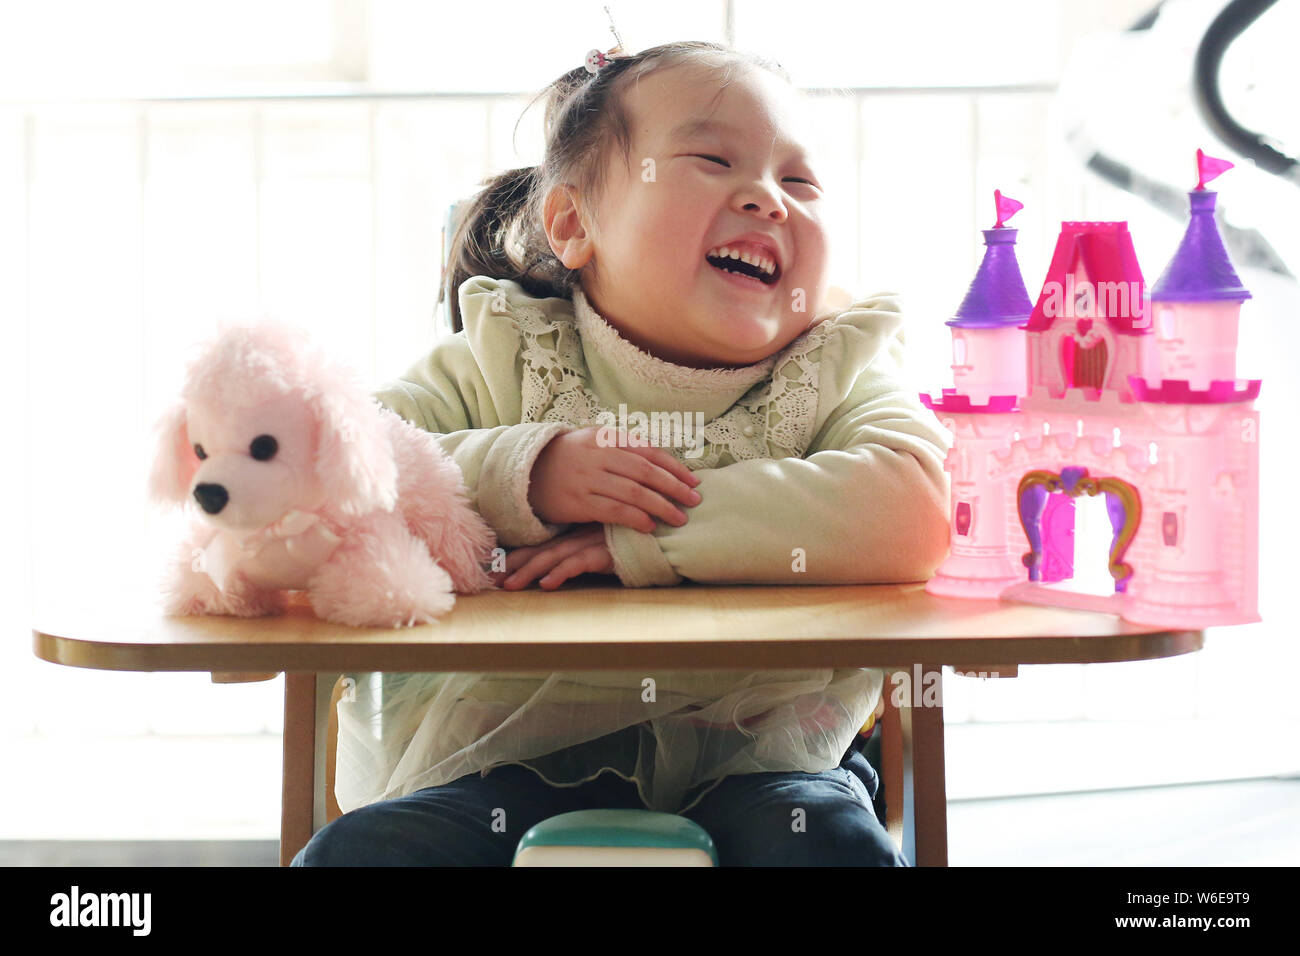 5-year-old 'sponge girl' Lele diagnosed with Spinal muscular atrophy (SMA), a rare neuromuscular disorder and often leading to early death, plays with Stock Photo